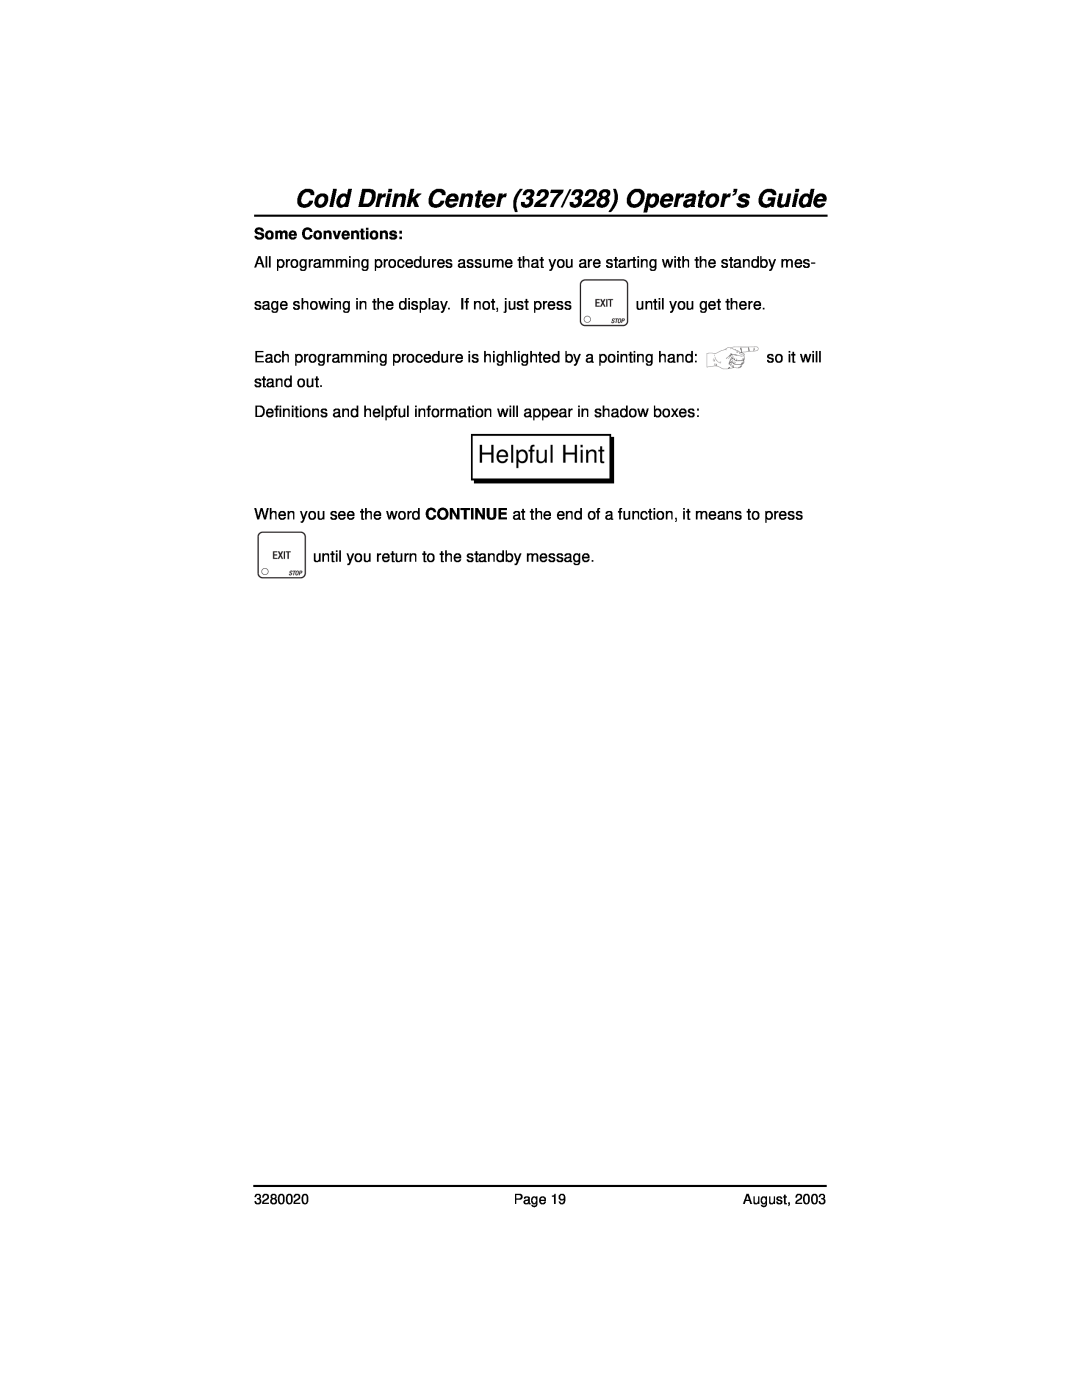 Everpure 325 manual Cold Drink Center 327/328 Operator’s Guide, Helpful Hint, Some Conventions 